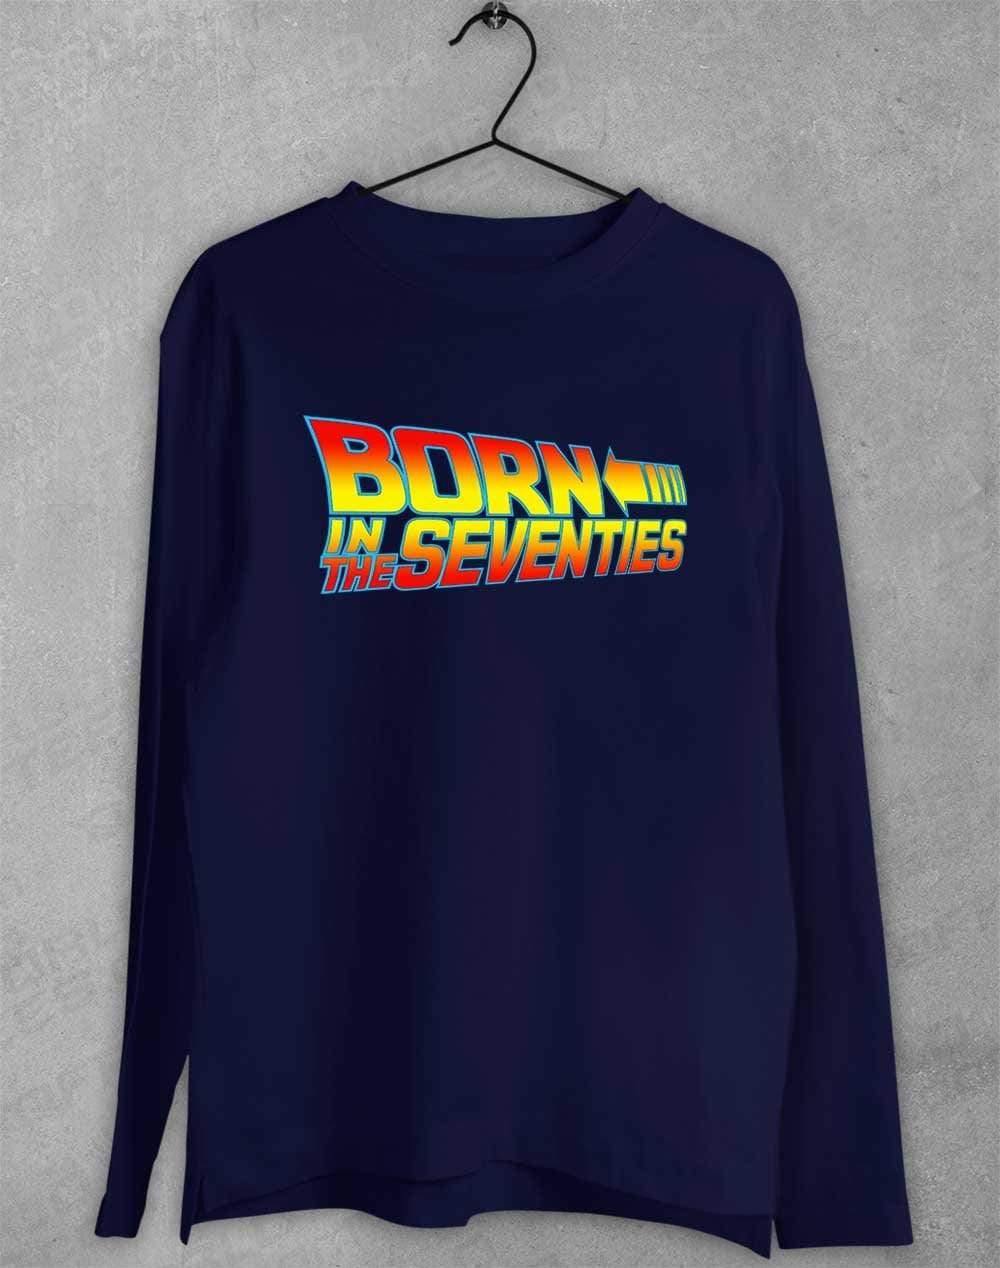 Born in the... (CHOOSE YOUR DECADE!) Long Sleeve T-Shirt 1970s - Navy / S  - Off World Tees